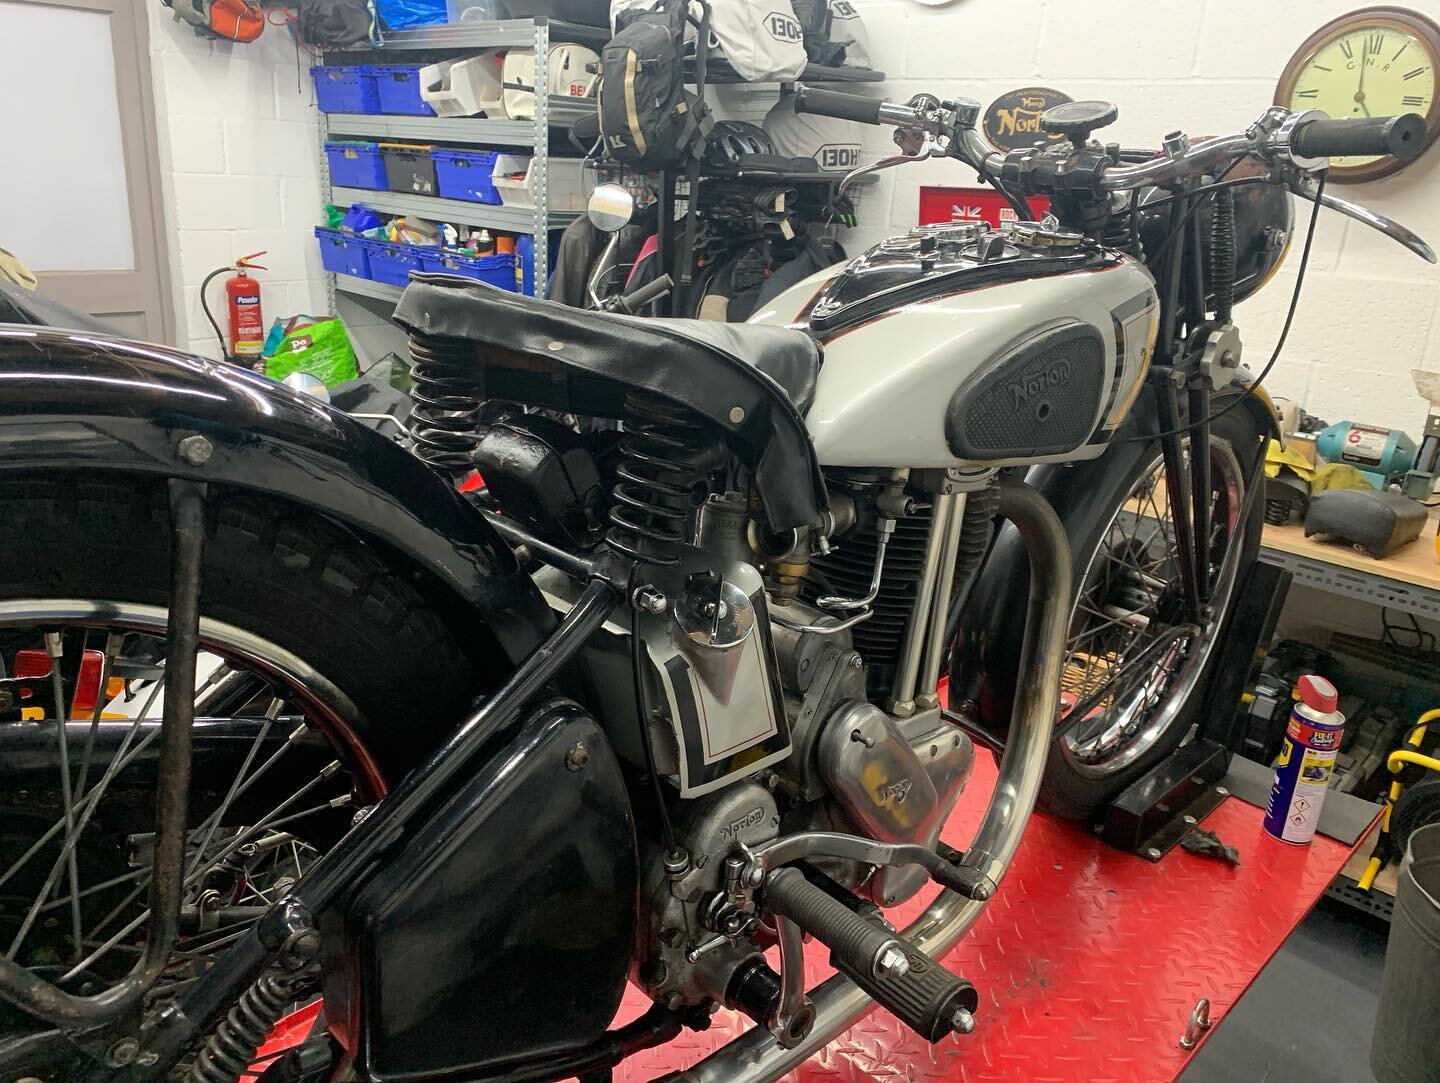 Latest project 1938 Norton Model 19. Just thought I would give it a polish, now in bits all over the garage. #nortonmotorcycles #girderforks #nortonmodel18 #oldmotorcycle #northcotswolds